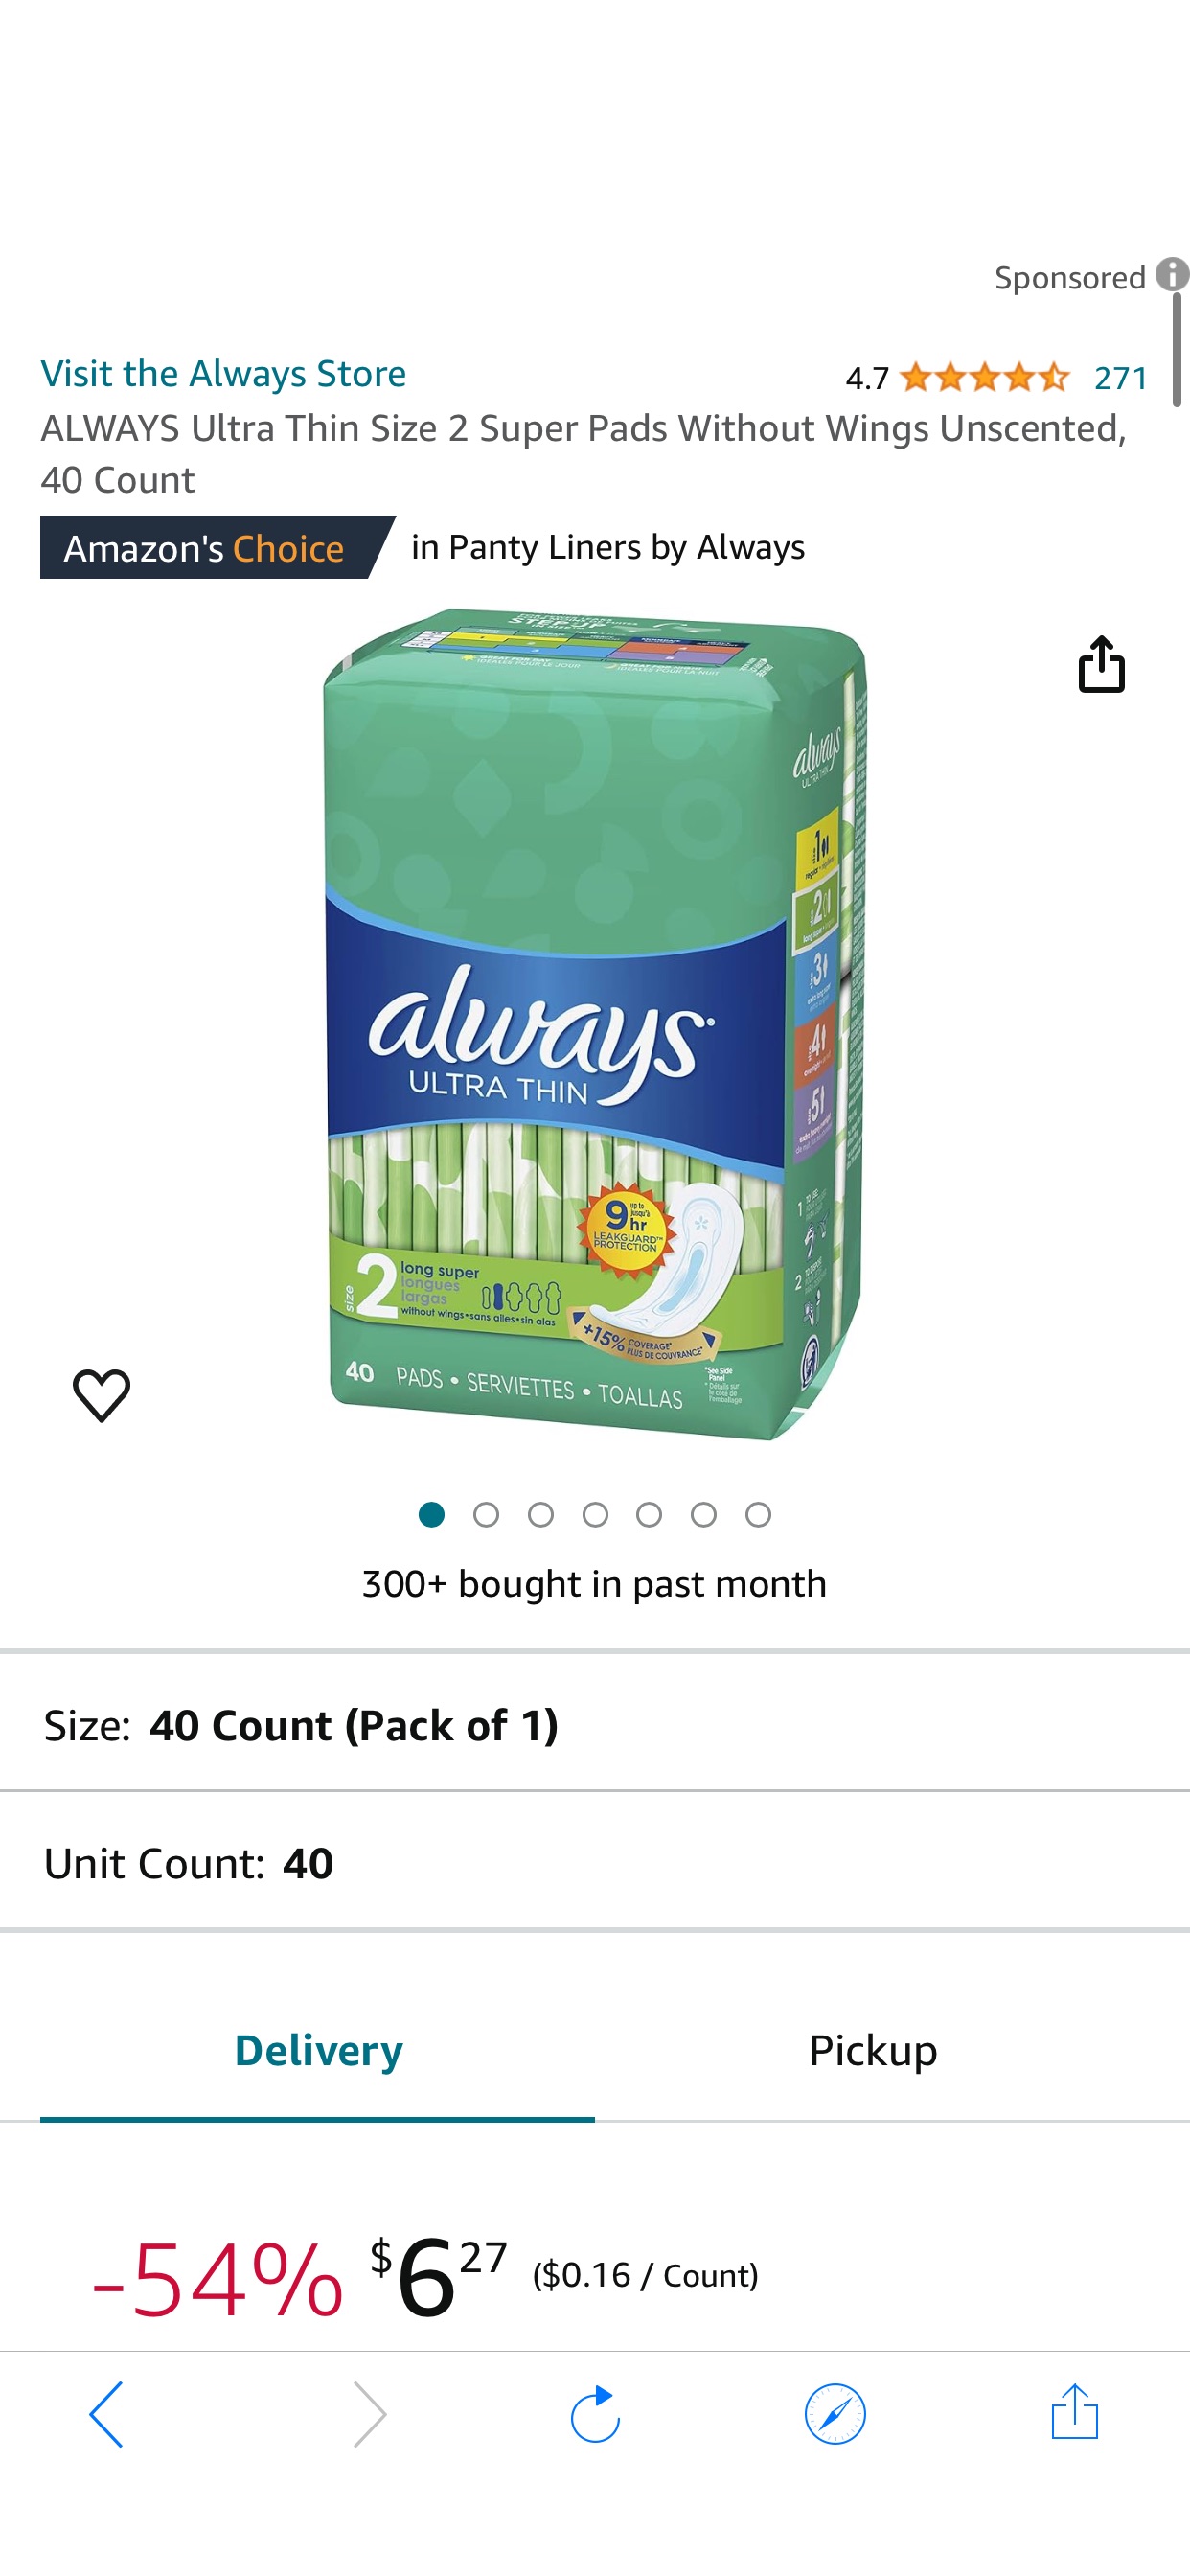 Amazon.com: ALWAYS Ultra Thin Size 2 Super Pads Without Wings Unscented, 40 Count : Health & Household 超薄卫生巾40片